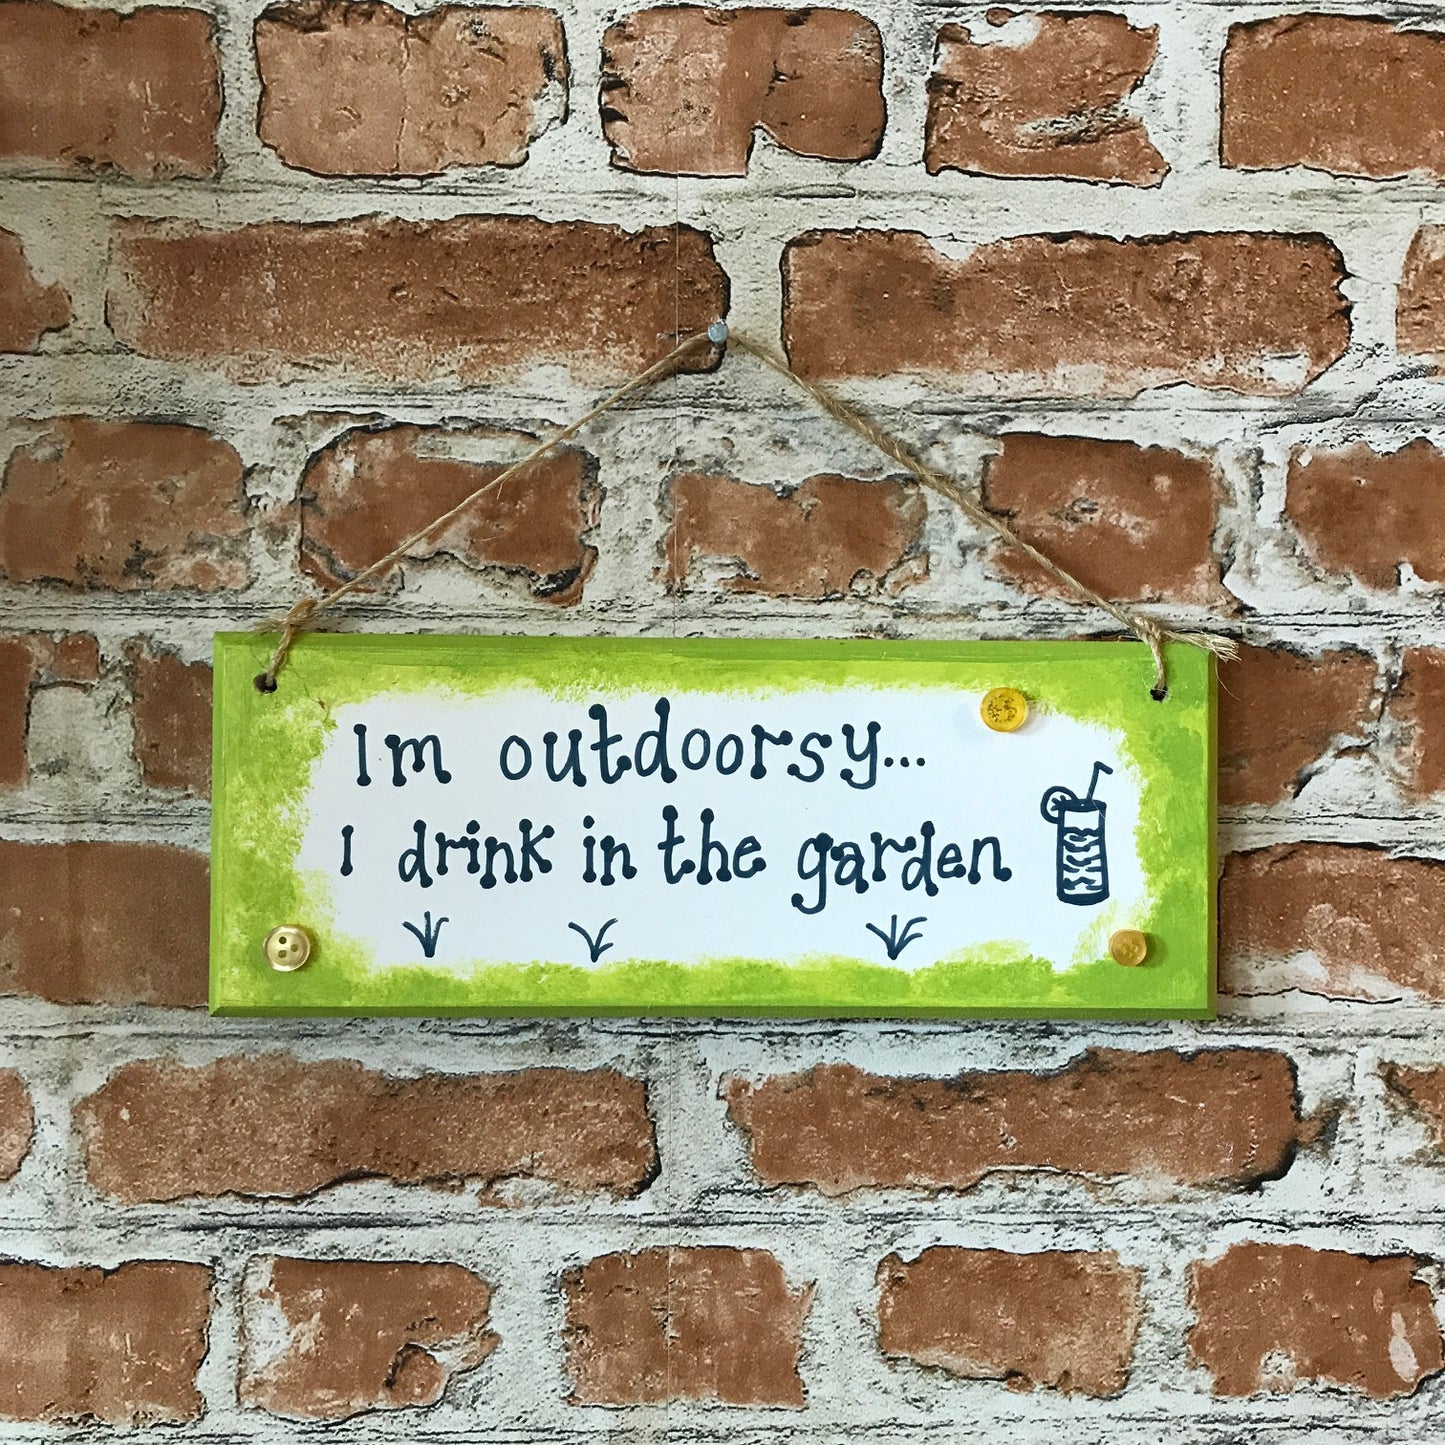 I'm outdoorsy... I drink in the garden - Handmade Wooden Plaque from The Wrong End of Town